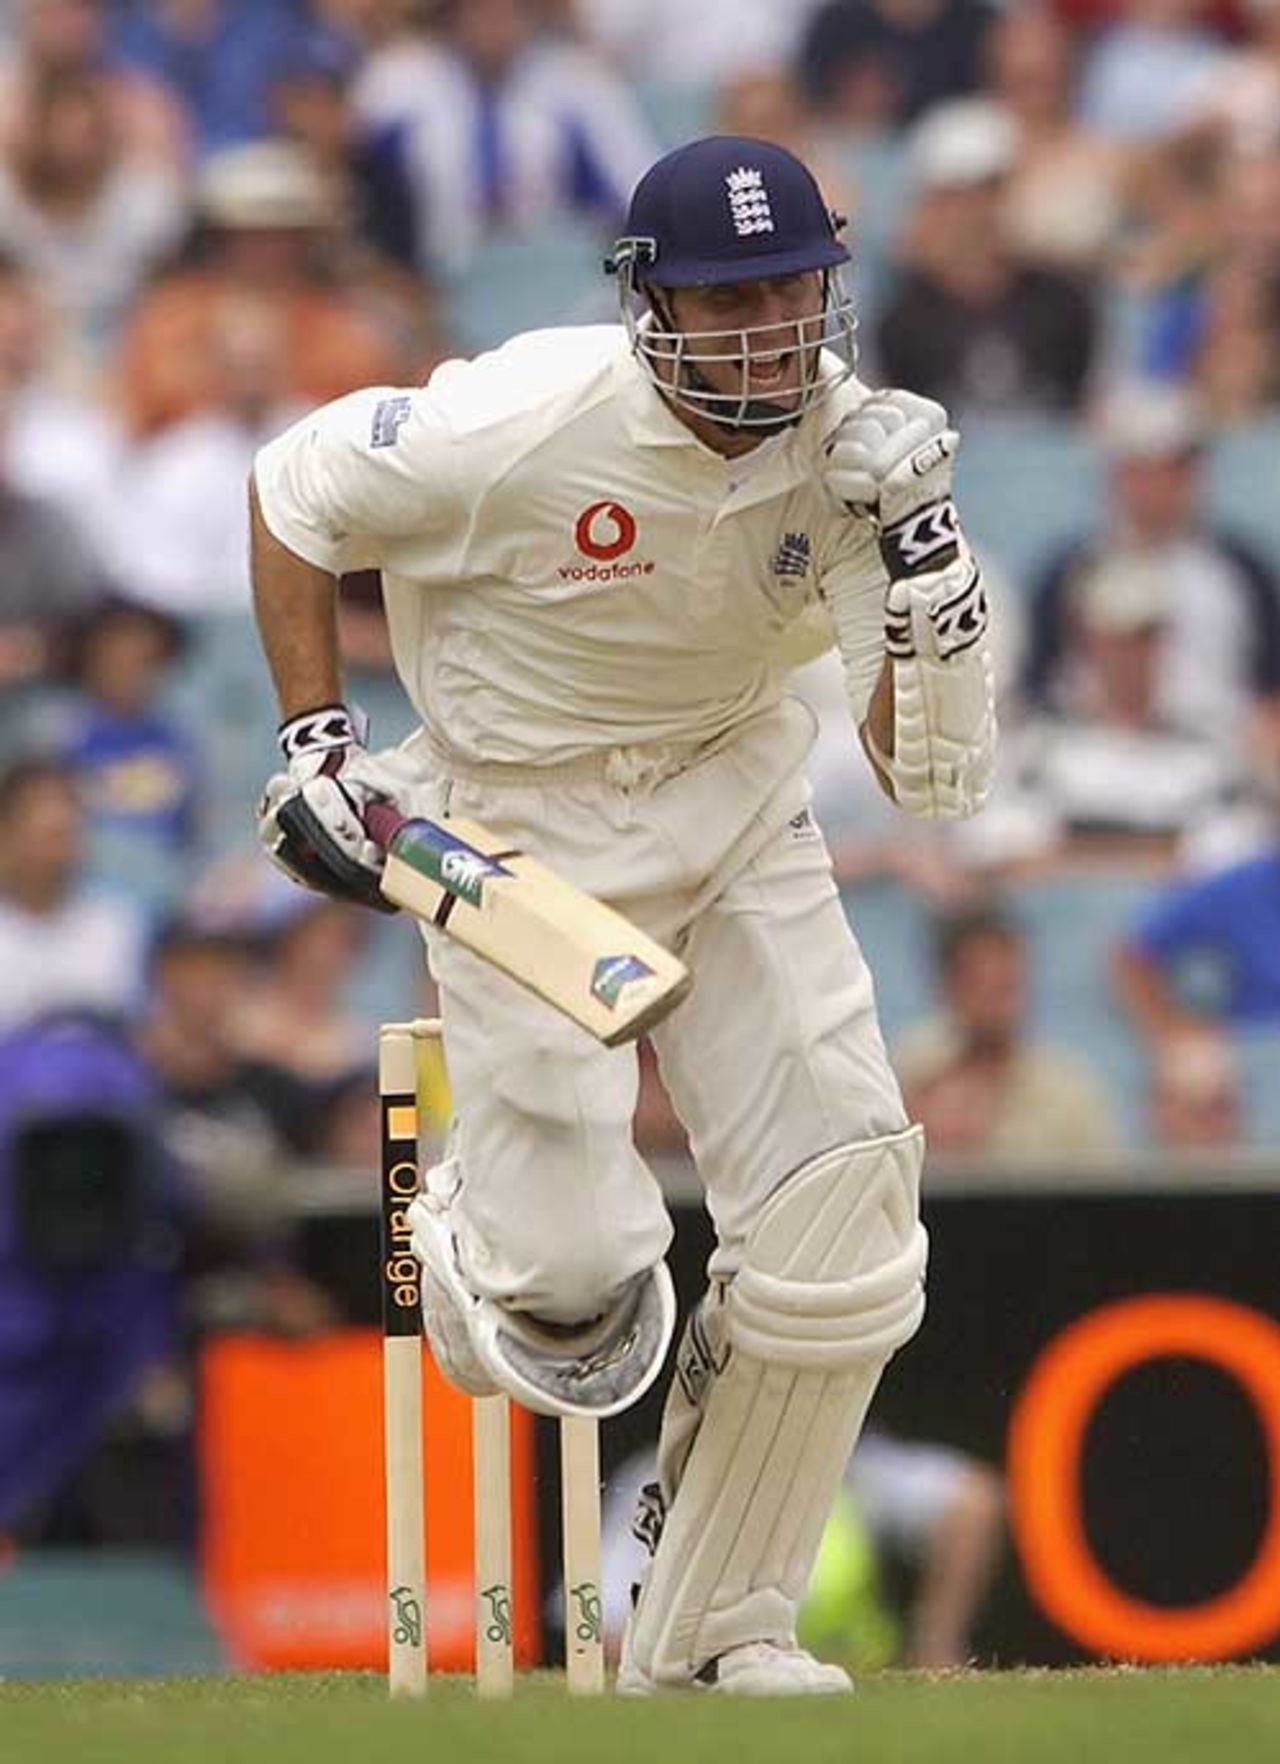 MELBOURNE - DECEMBER 29: Michael Vaughan of England celebrates his century during the fourth day of the fourth Ashes Test between Australia and England at the Melbourne Cricket Ground in Melbourne, Australia on December 29, 2002.